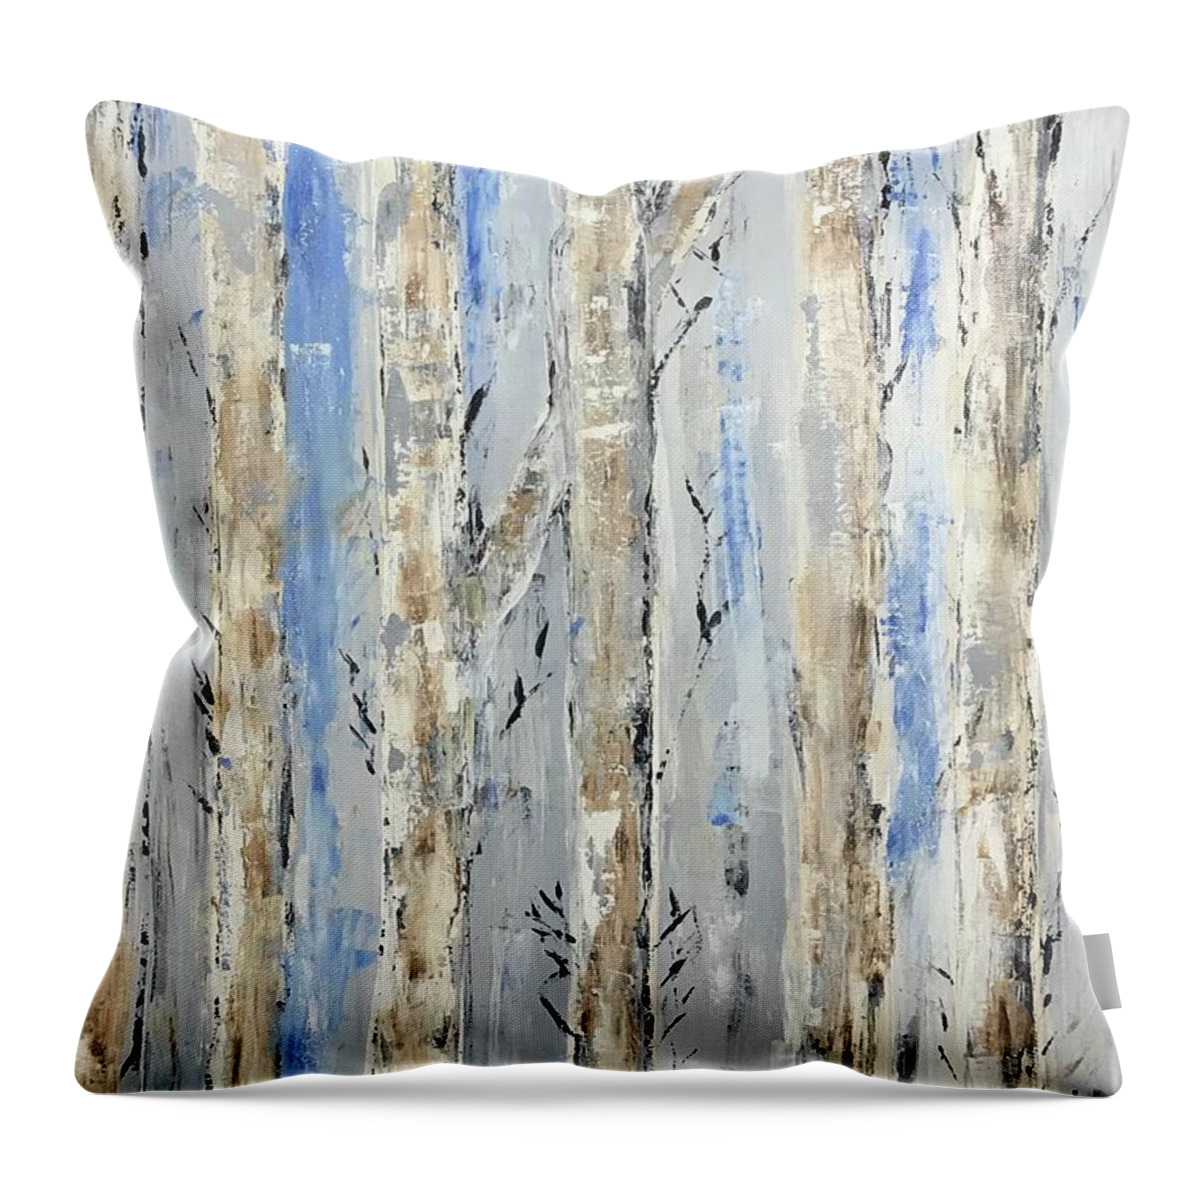 Original Art Work Throw Pillow featuring the painting Birch Trees, Blue Skies by Theresa Honeycheck